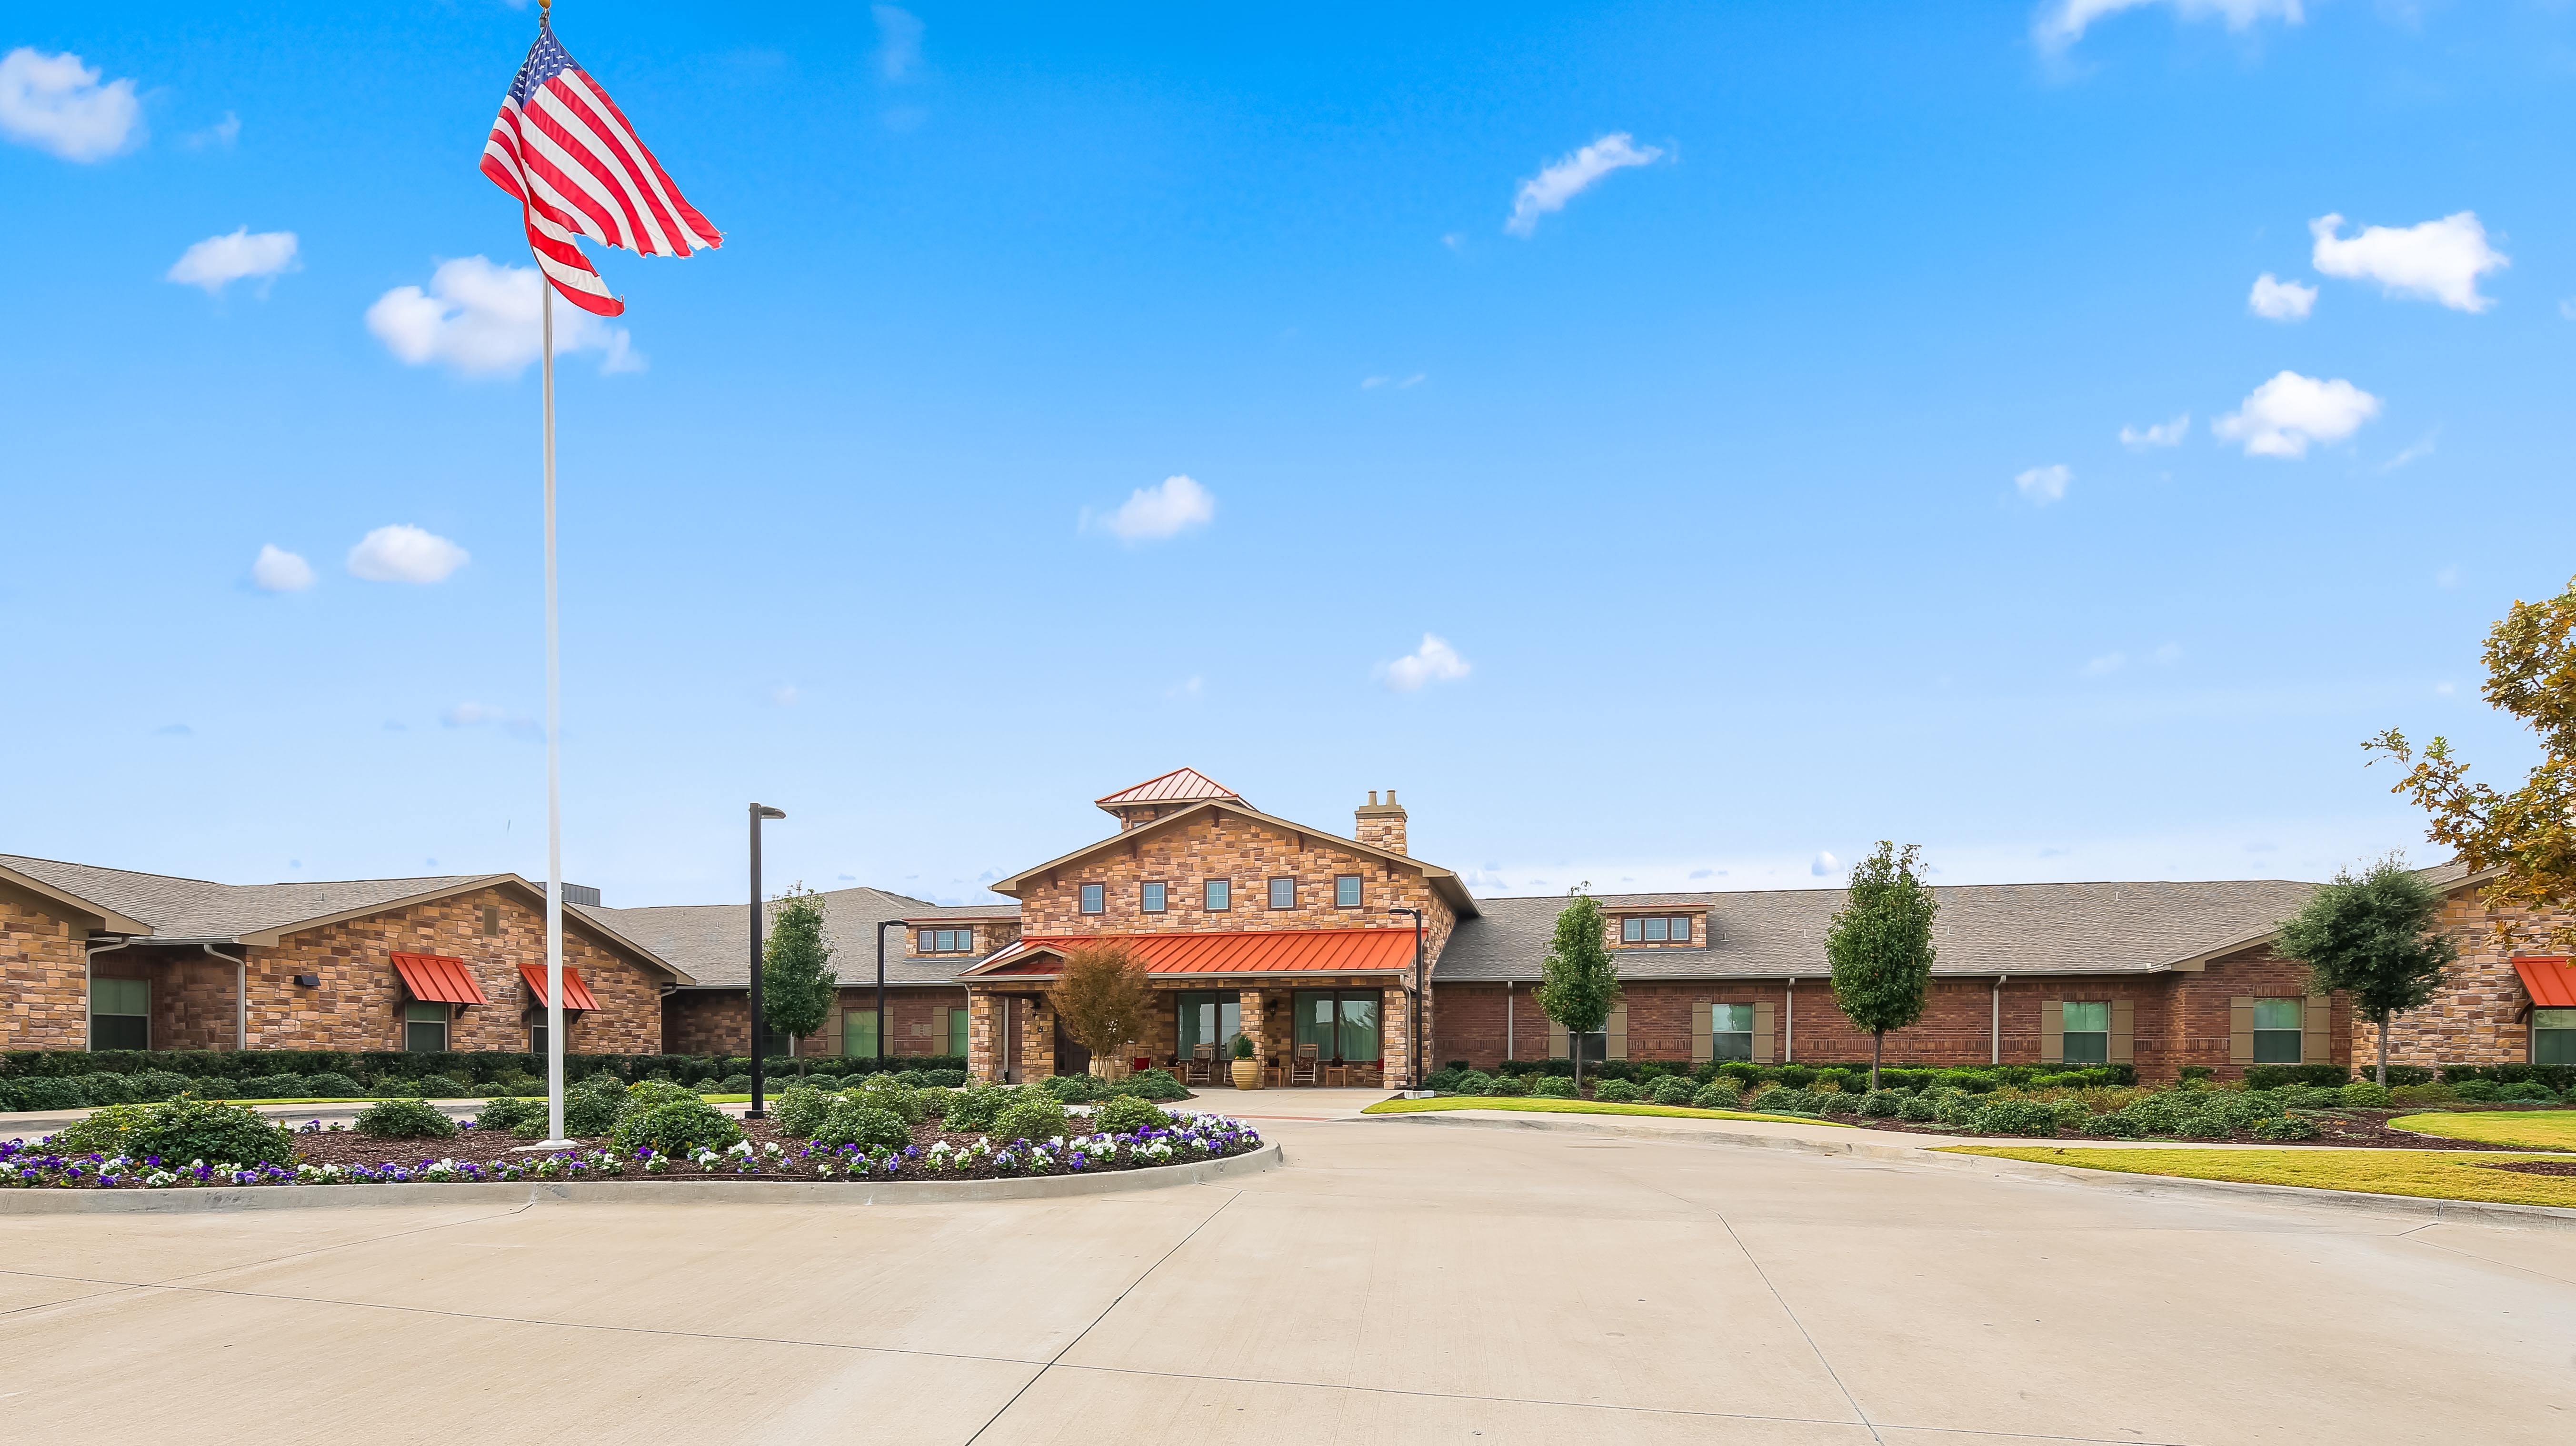 Rock Ridge Assisted Living and Memory Care community exterior